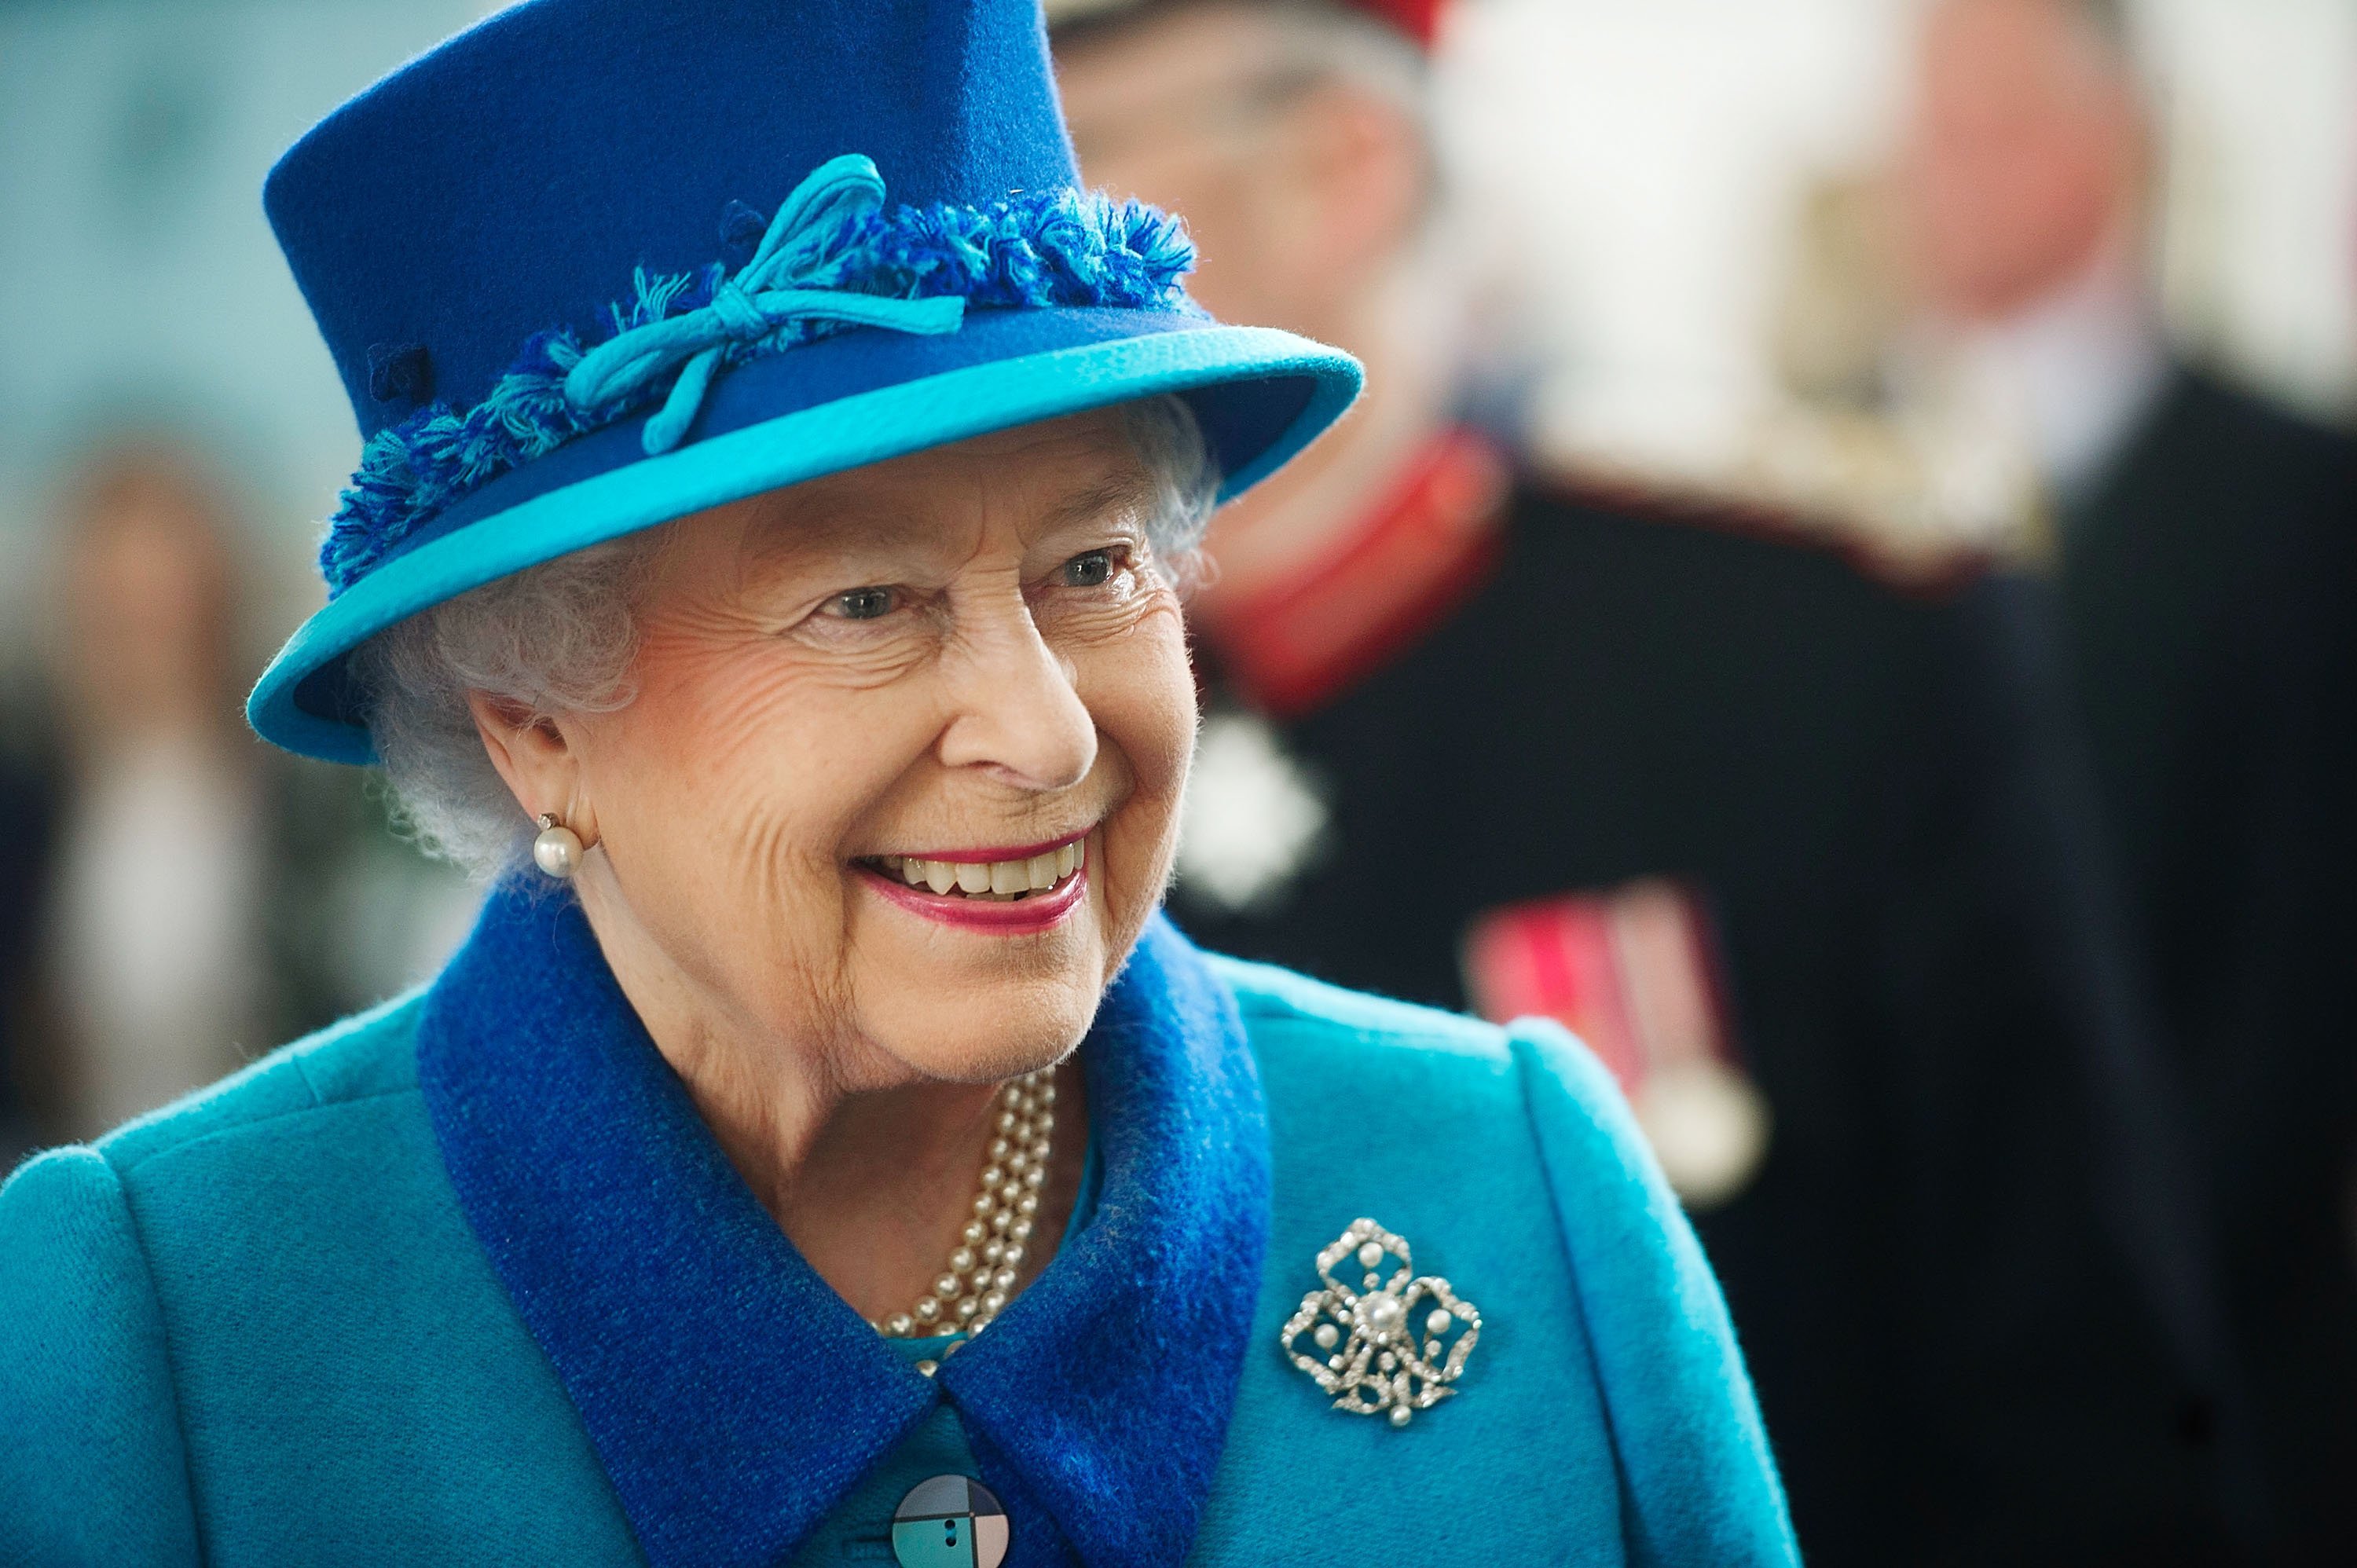 Queen Elizabeth II during a visit to the Chapel to view the restoration and meet local people involved with the project at the Royal Dockyard Chapel on April 29, 2014, in Pembroke Dock, United Kingdom. | Source: Getty Images.